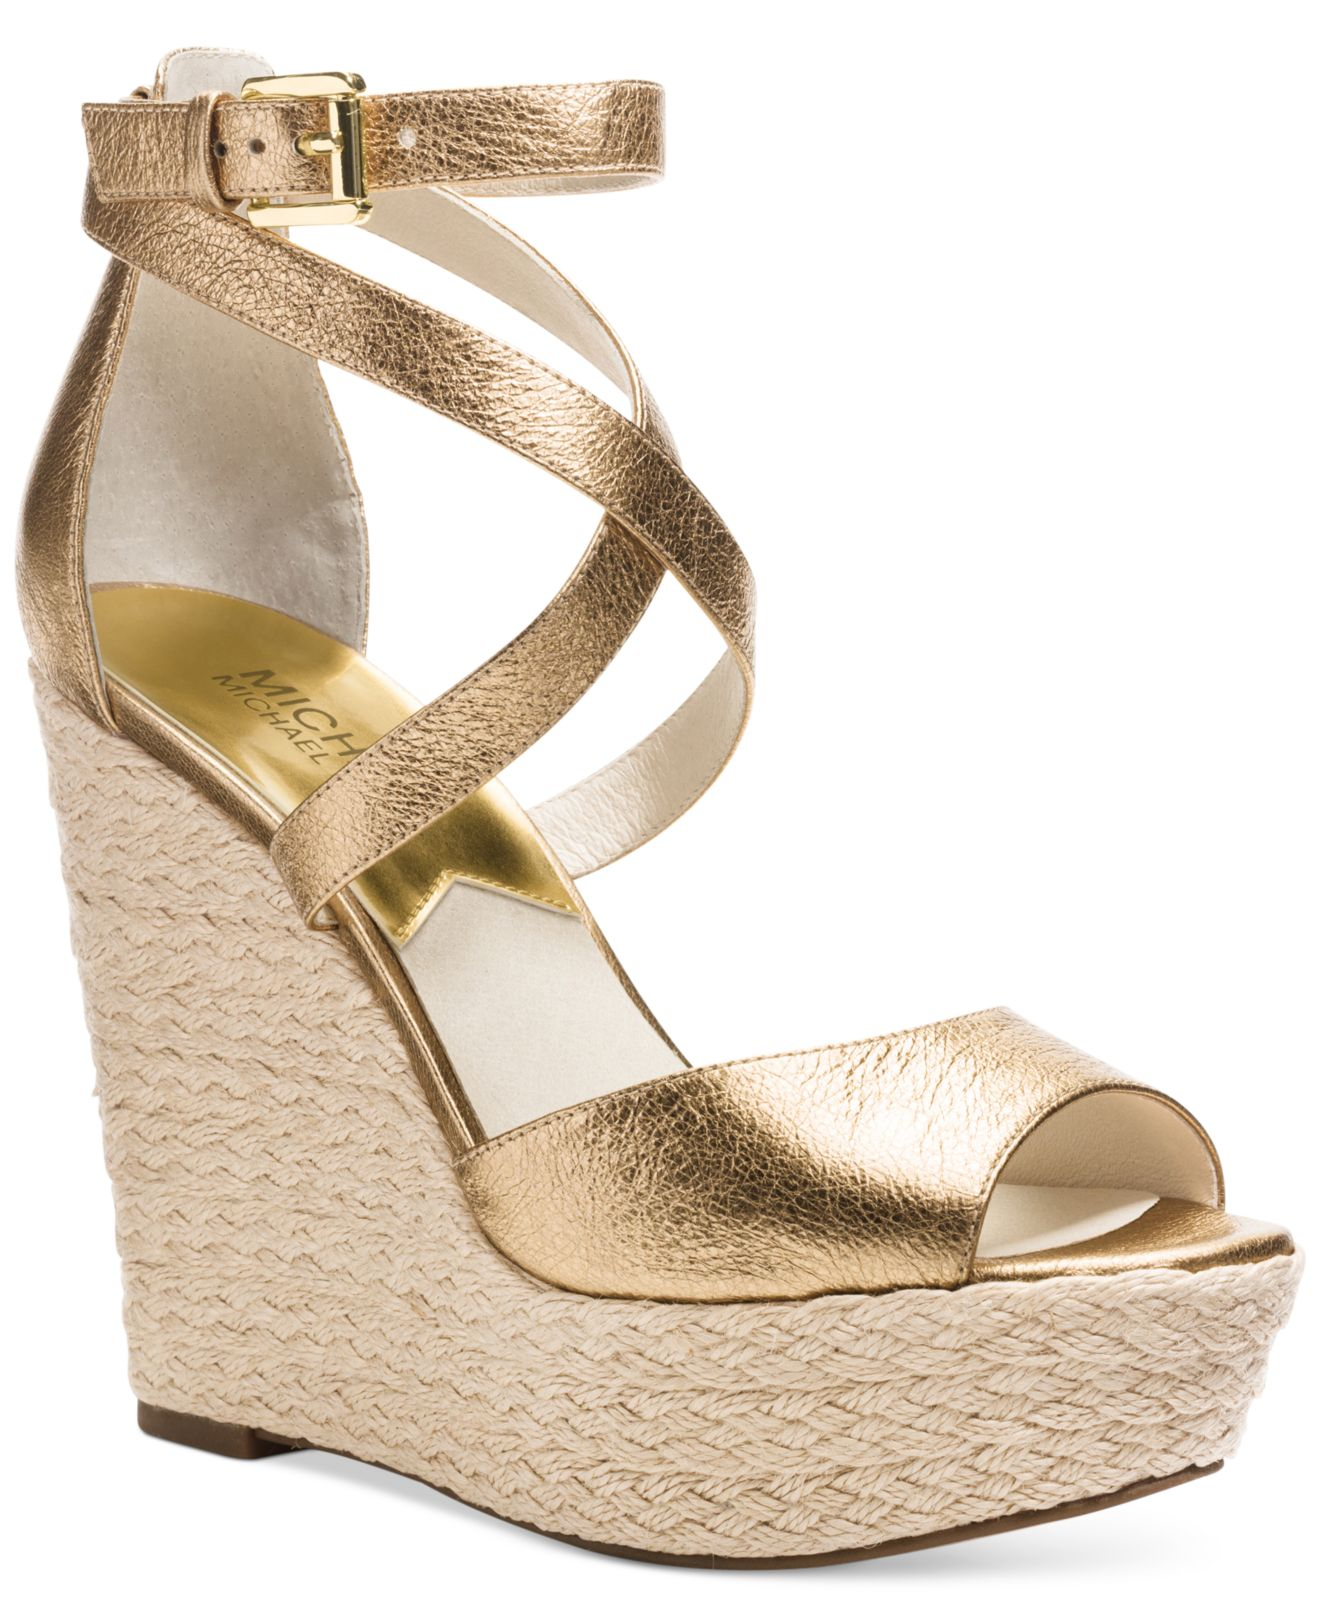 michael kors gold wedge shoes